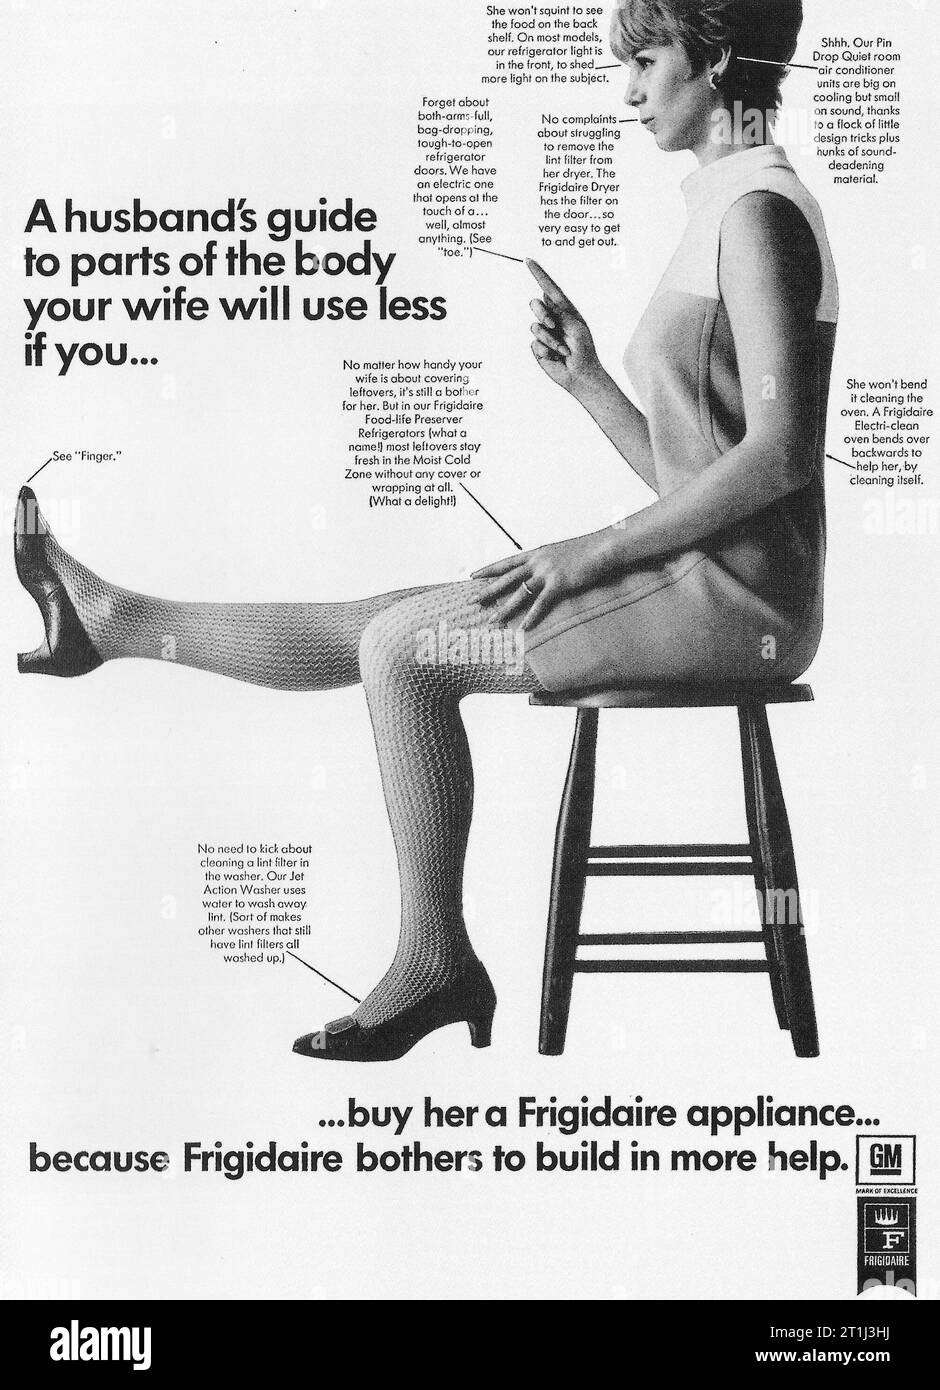 1968 Frigidaire Appliances Ad. 'A husband's guide to parts of the body your wife will use less if you...buy her a Frigidaire appliance...' Stock Photo